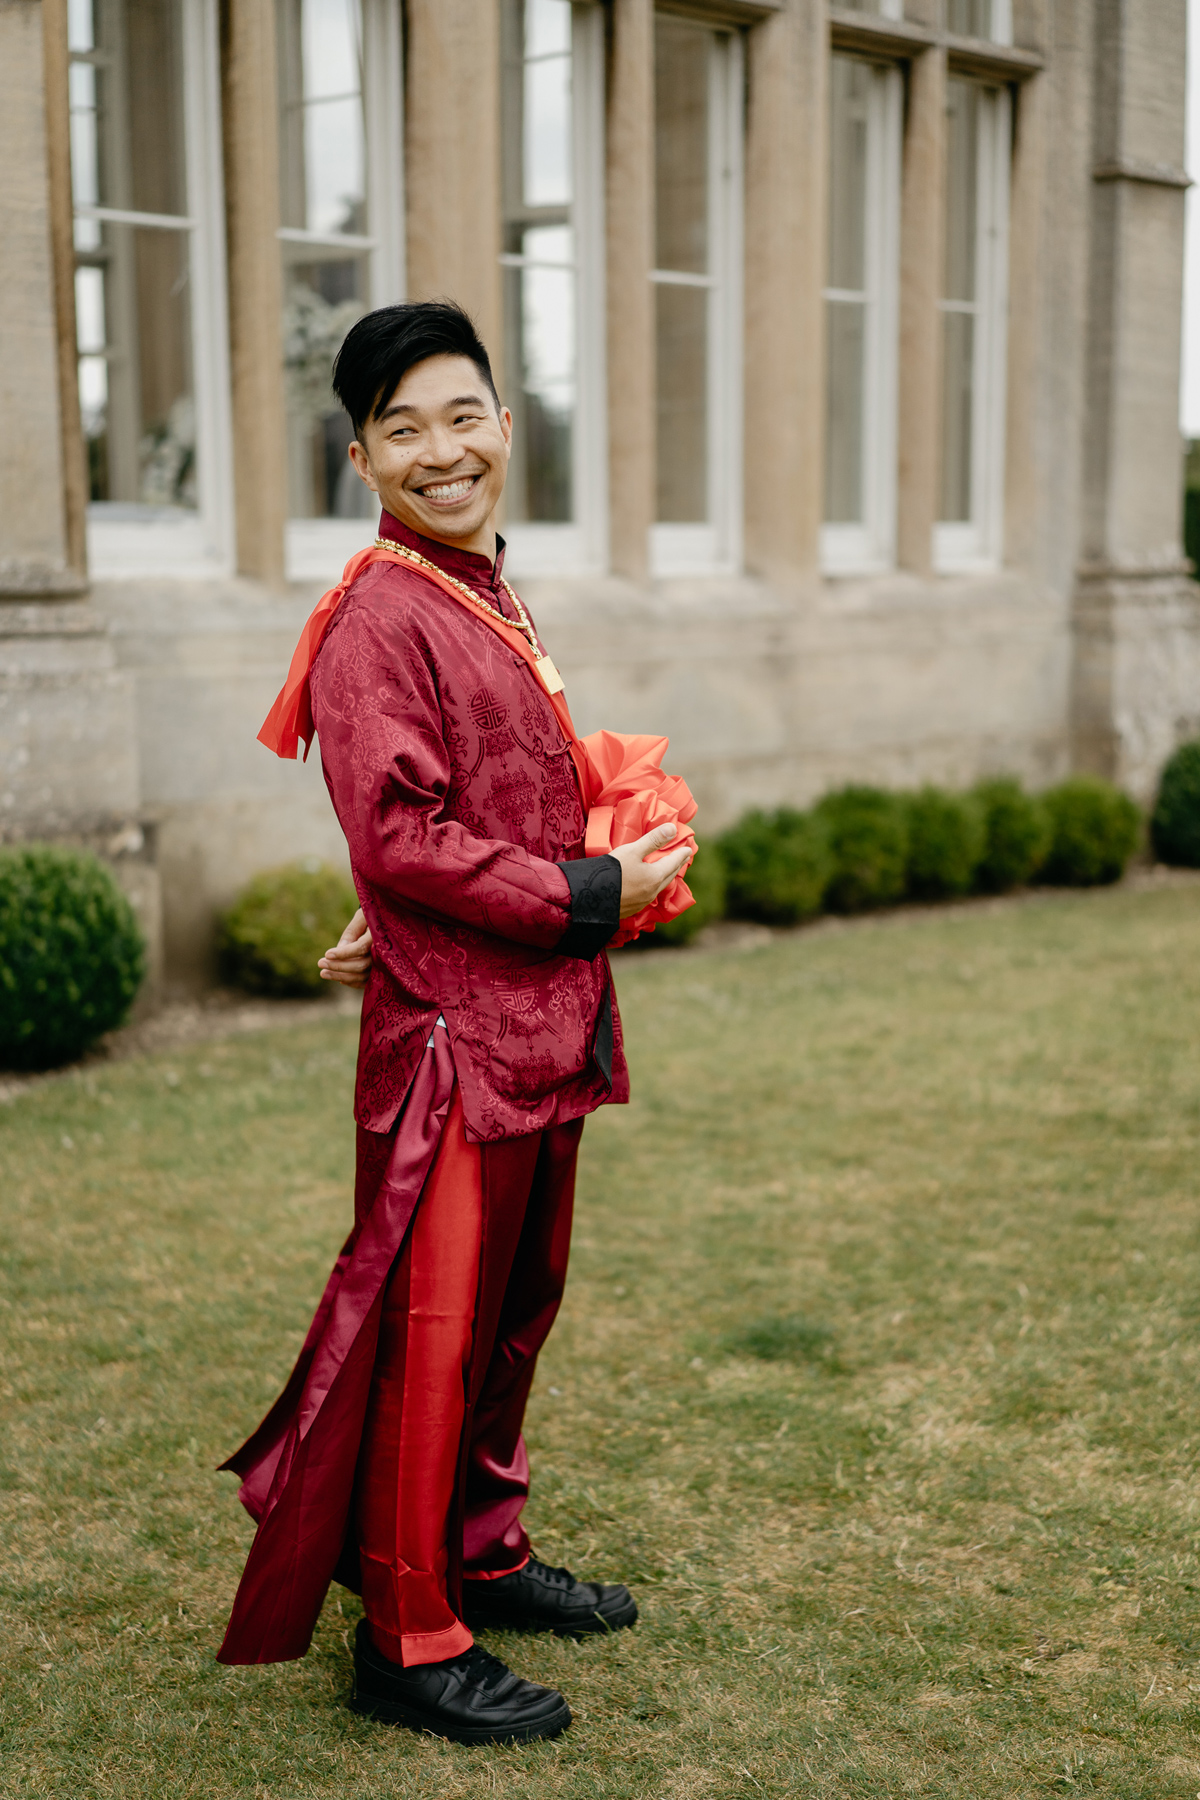 wedding portraits in traditional Chinese dresses at Stoke Rochford Hall Hotel